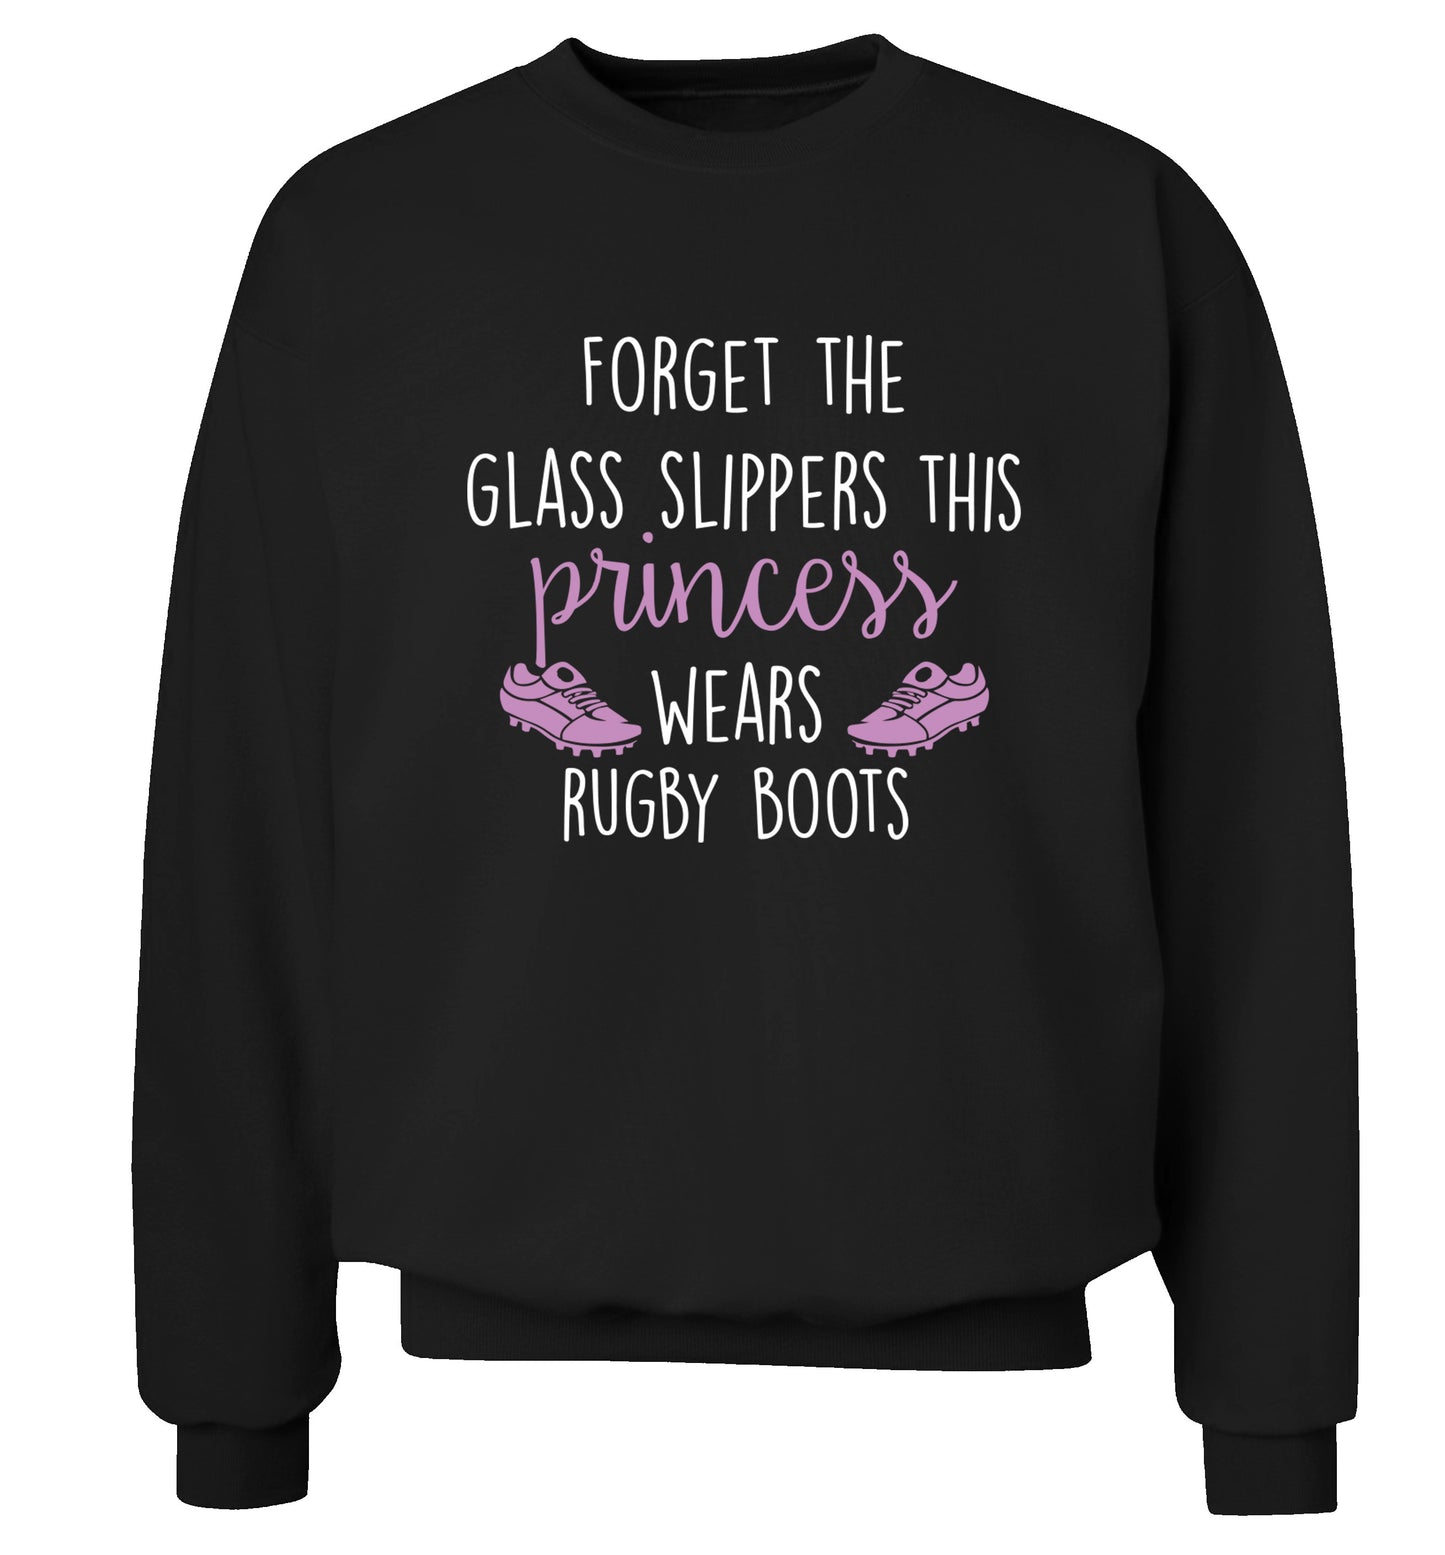 Forget the glass slippers this princess wears rugby boots Adult's unisex black Sweater 2XL